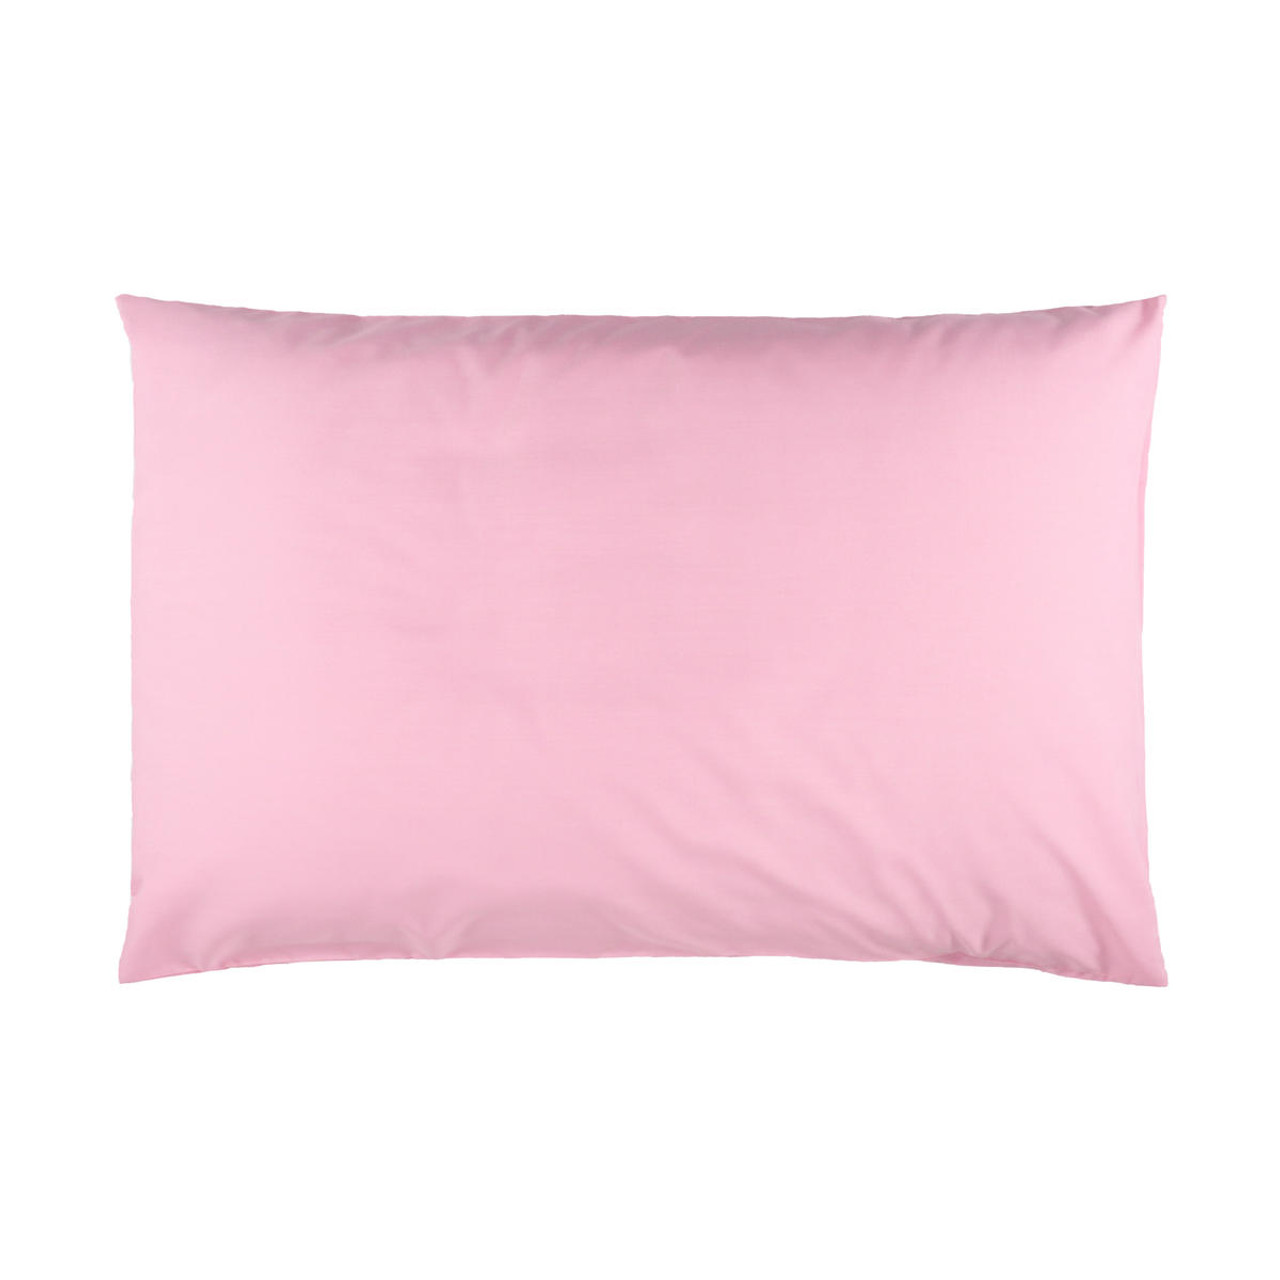 Low Cost Flame Retardent Pillowcases BS7175 Best Quality With Price Promise  Guarantee